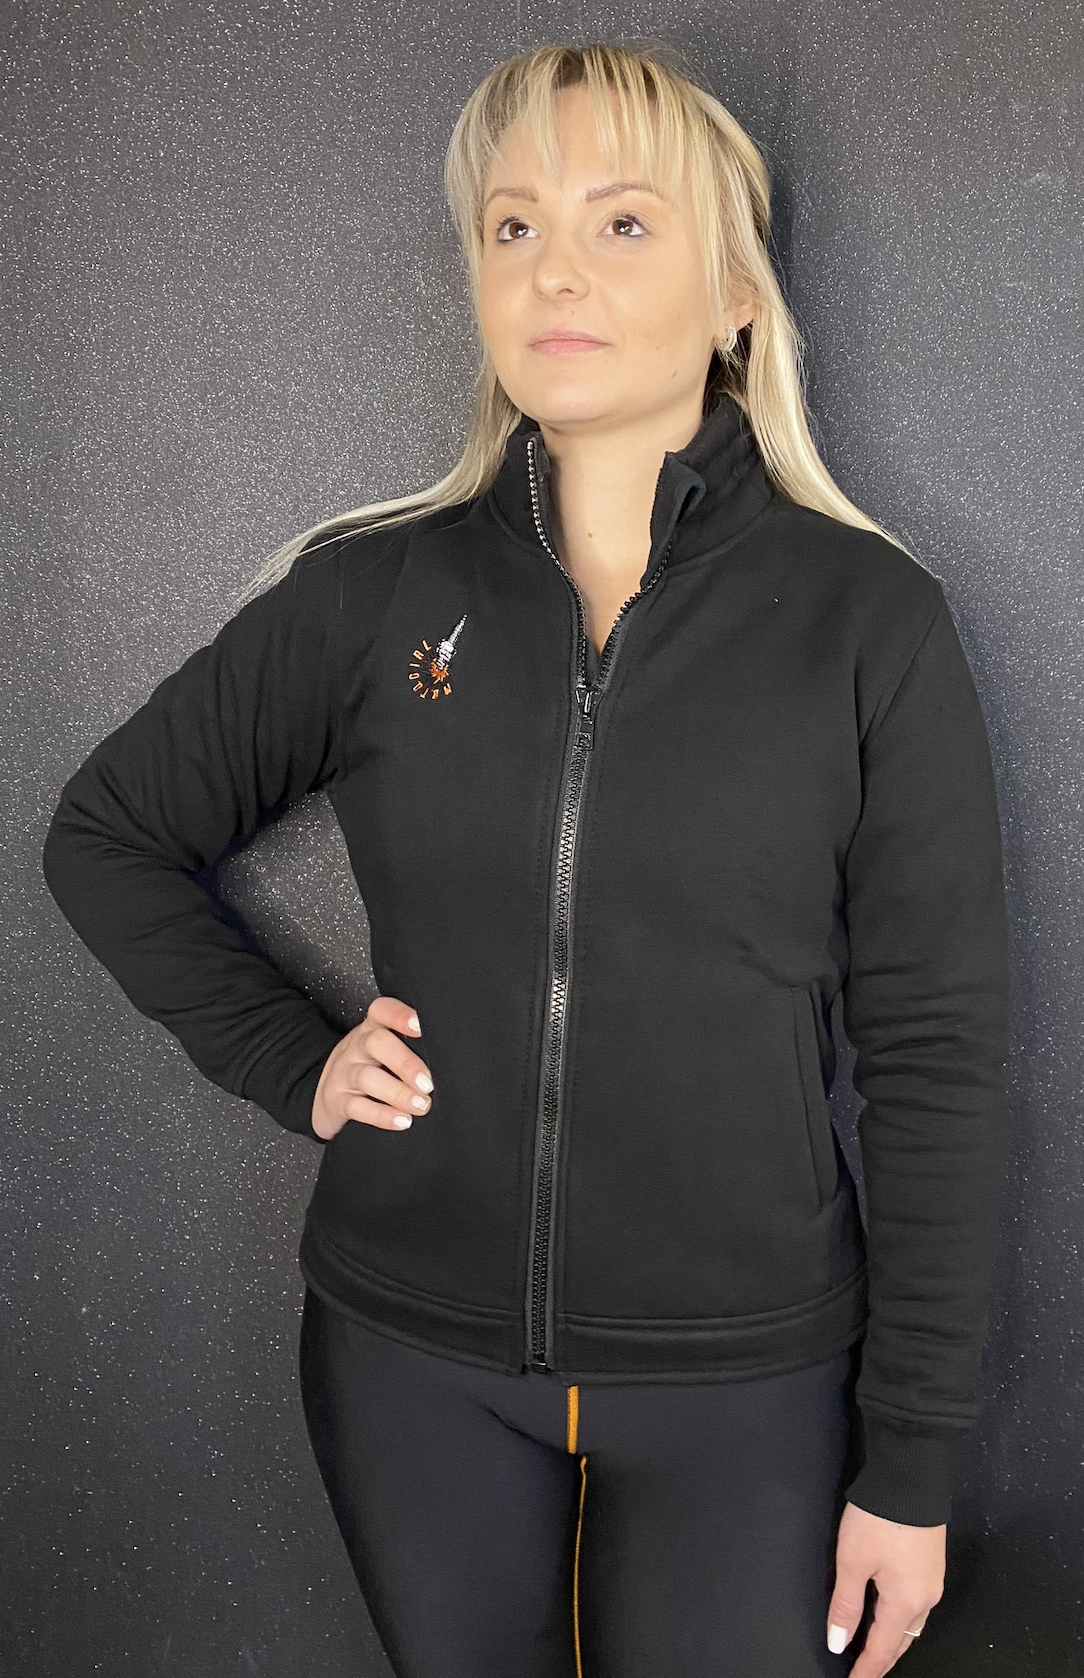 a blond woman wearing black sweatshirt with a zip and MotoGirl embroidery